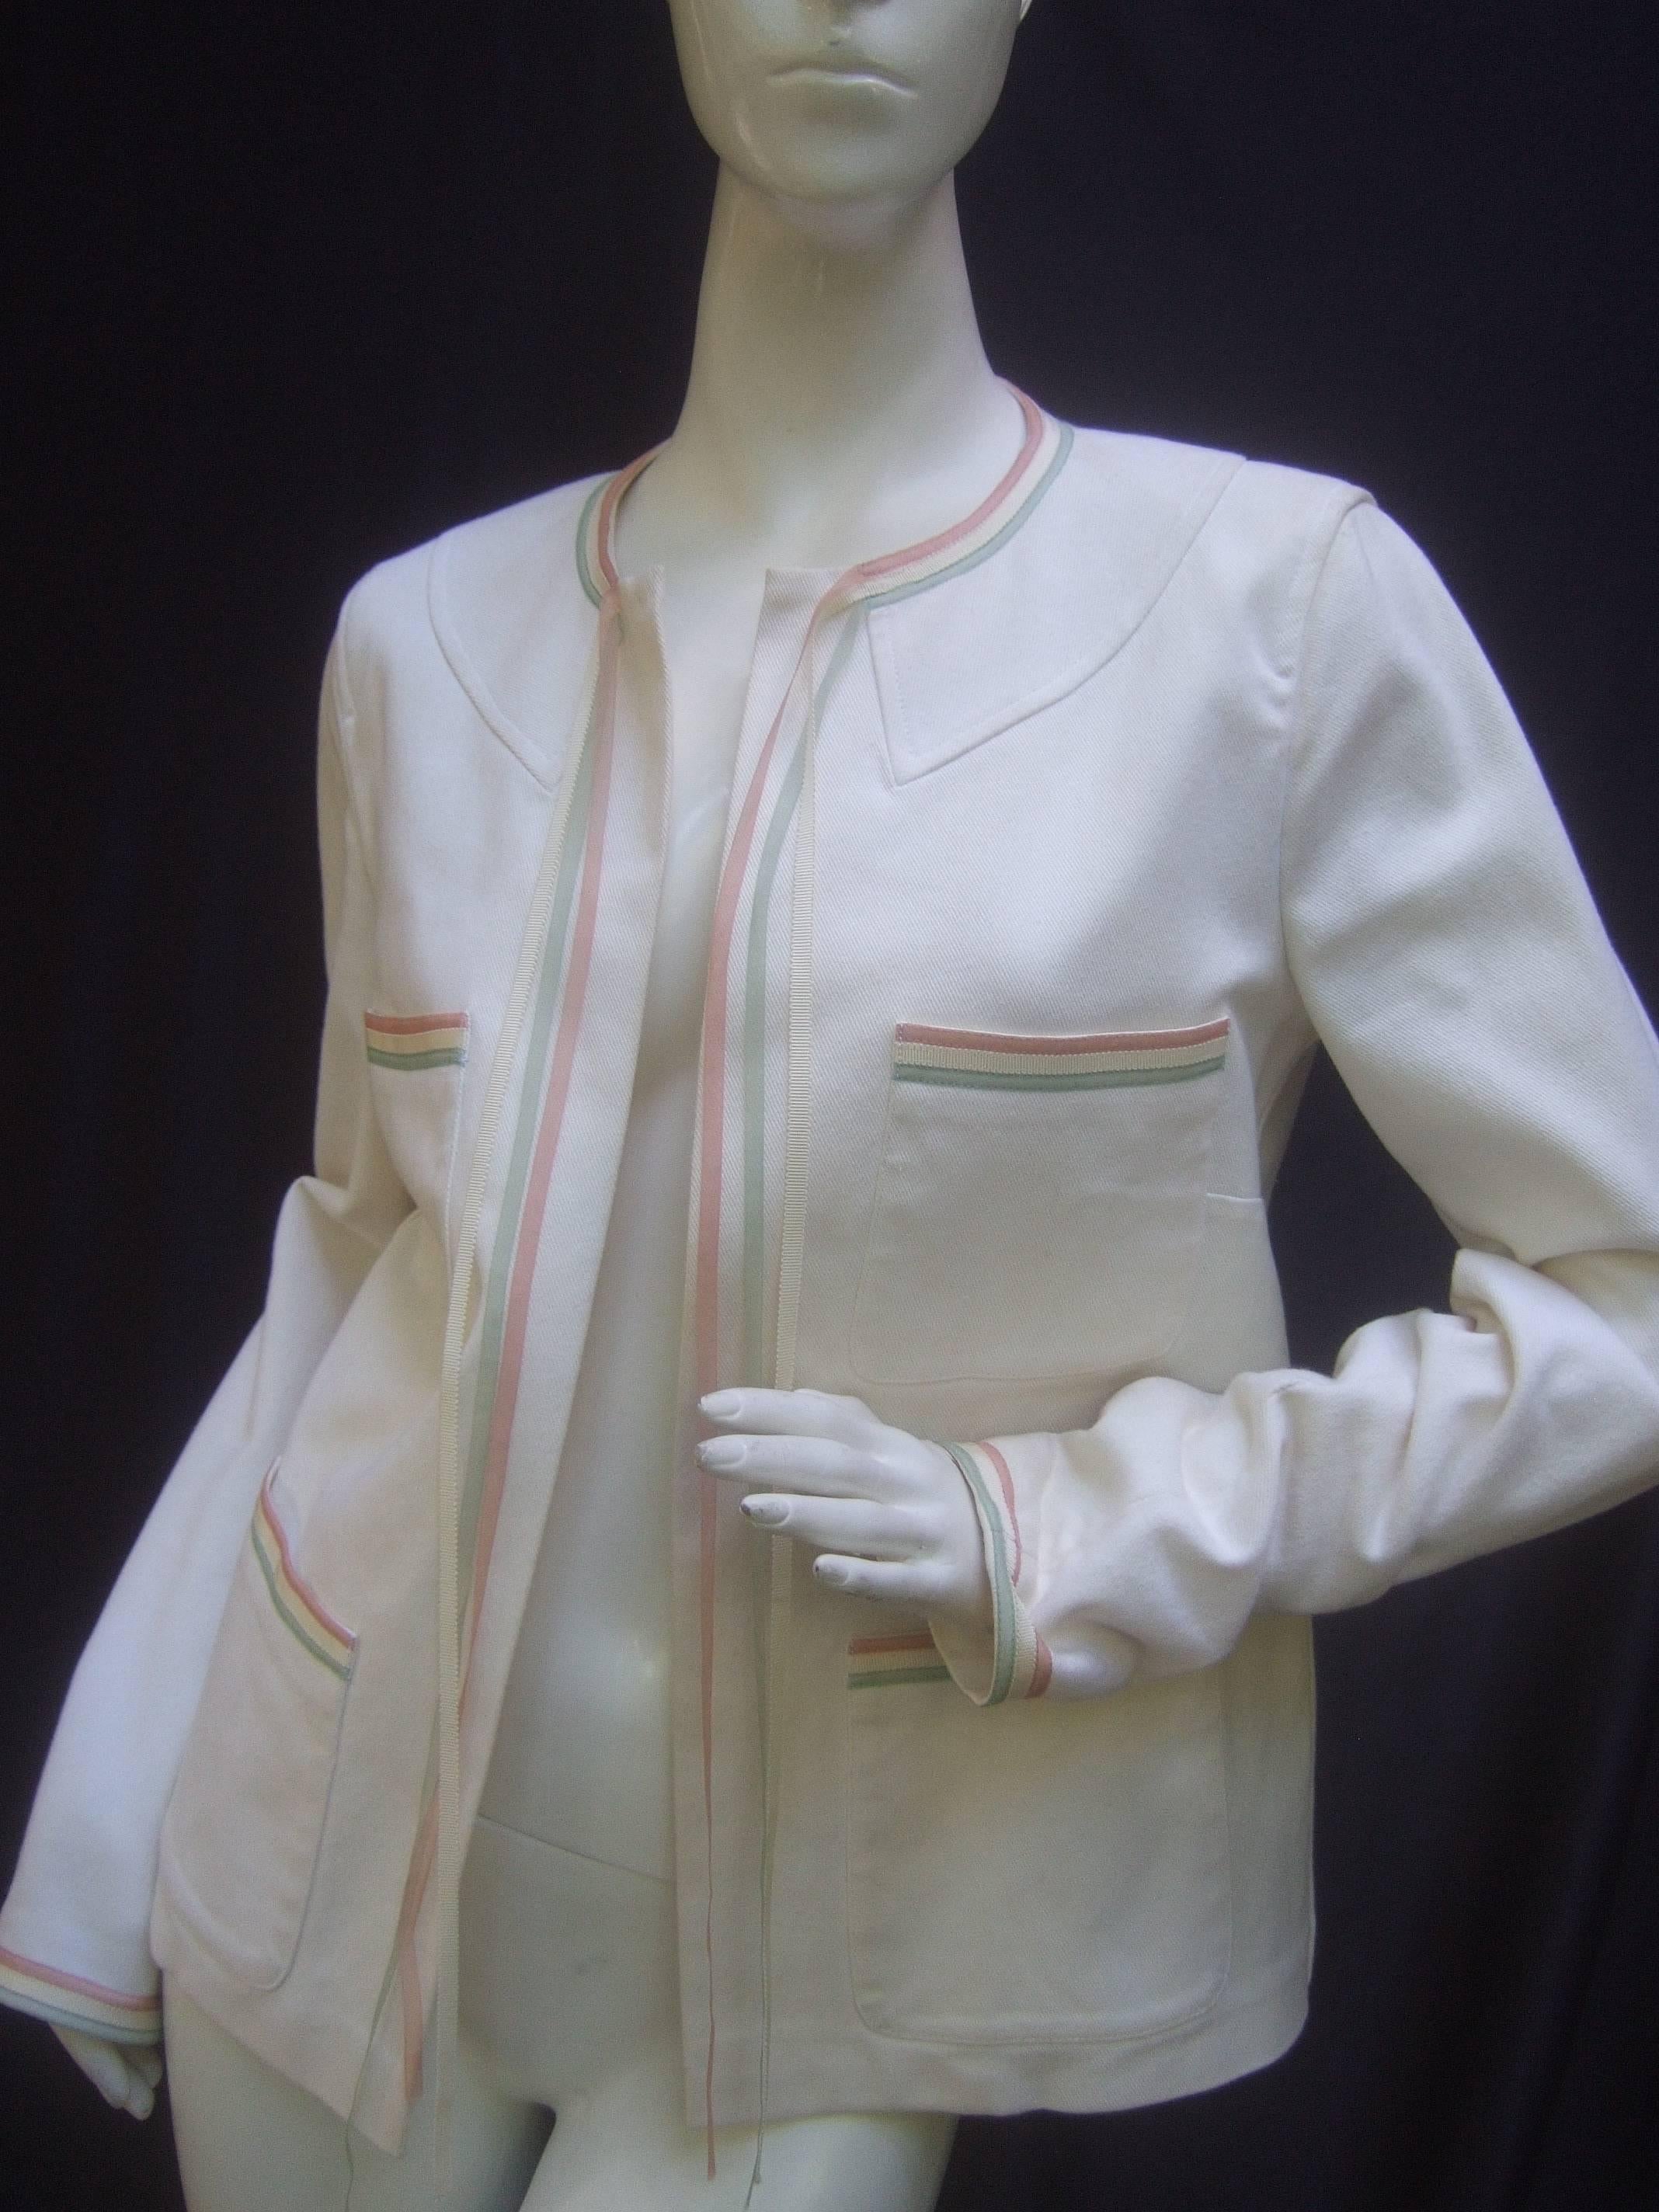 Chanel Crisp white cotton ribbon trim jacket Size 40
The stylish Chanel jacket is embellished with sinuous 
ribbons that cascade down from the front neckline

The four pockets and sleeve cuffs are accented with the
same trio of ribbons. The sheer